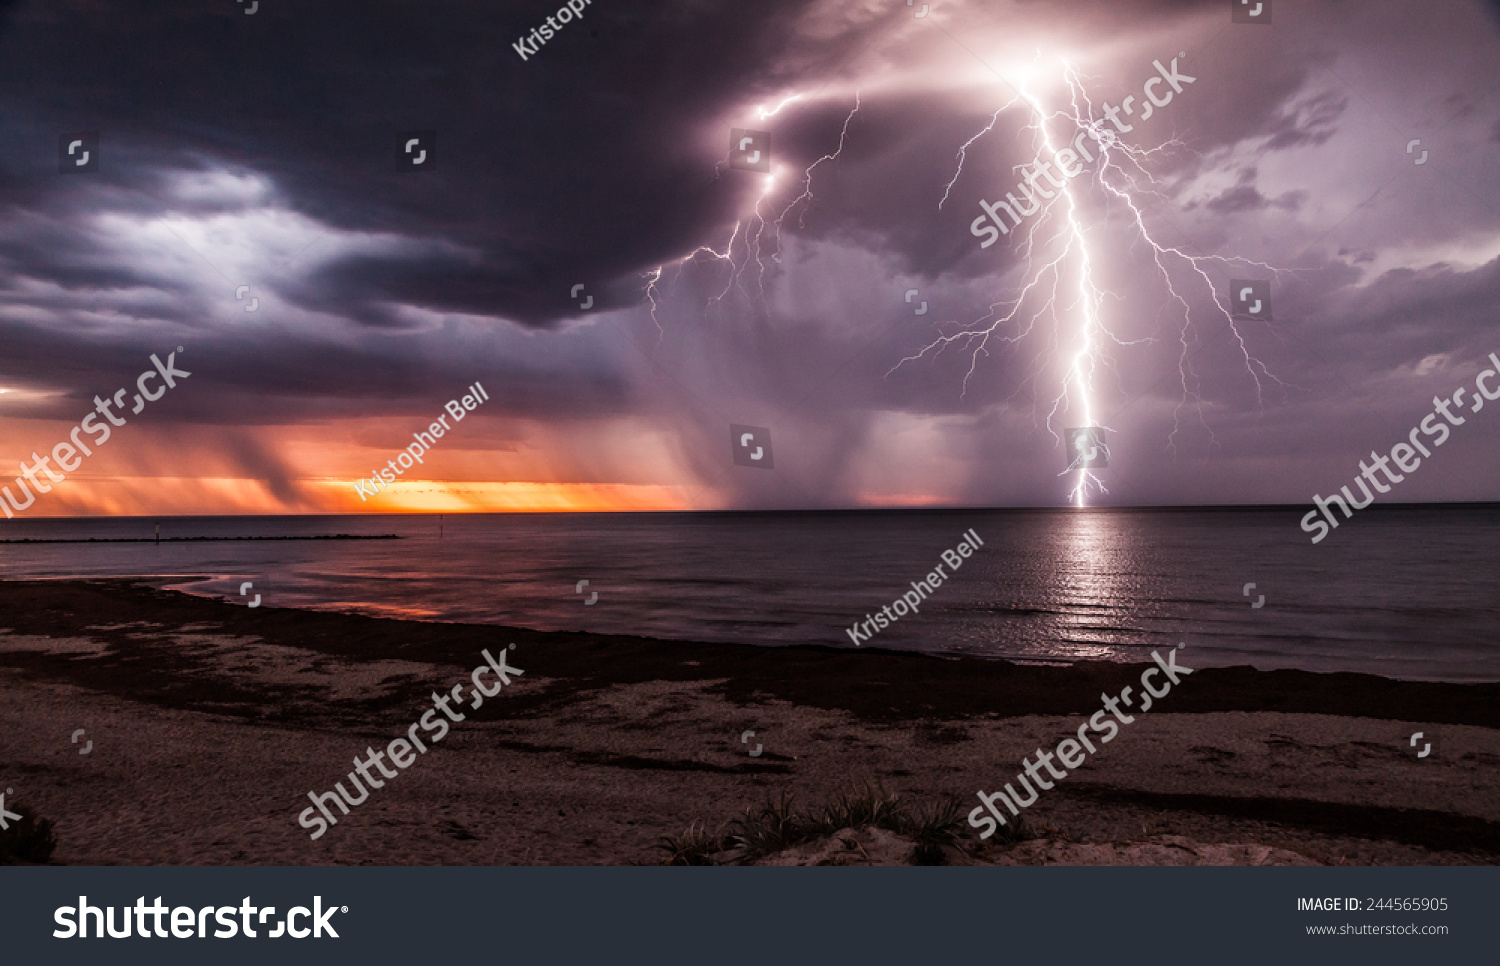 Lightening Storm Moving In Over Beach At Sunset. Stock Photo 244565905 ...